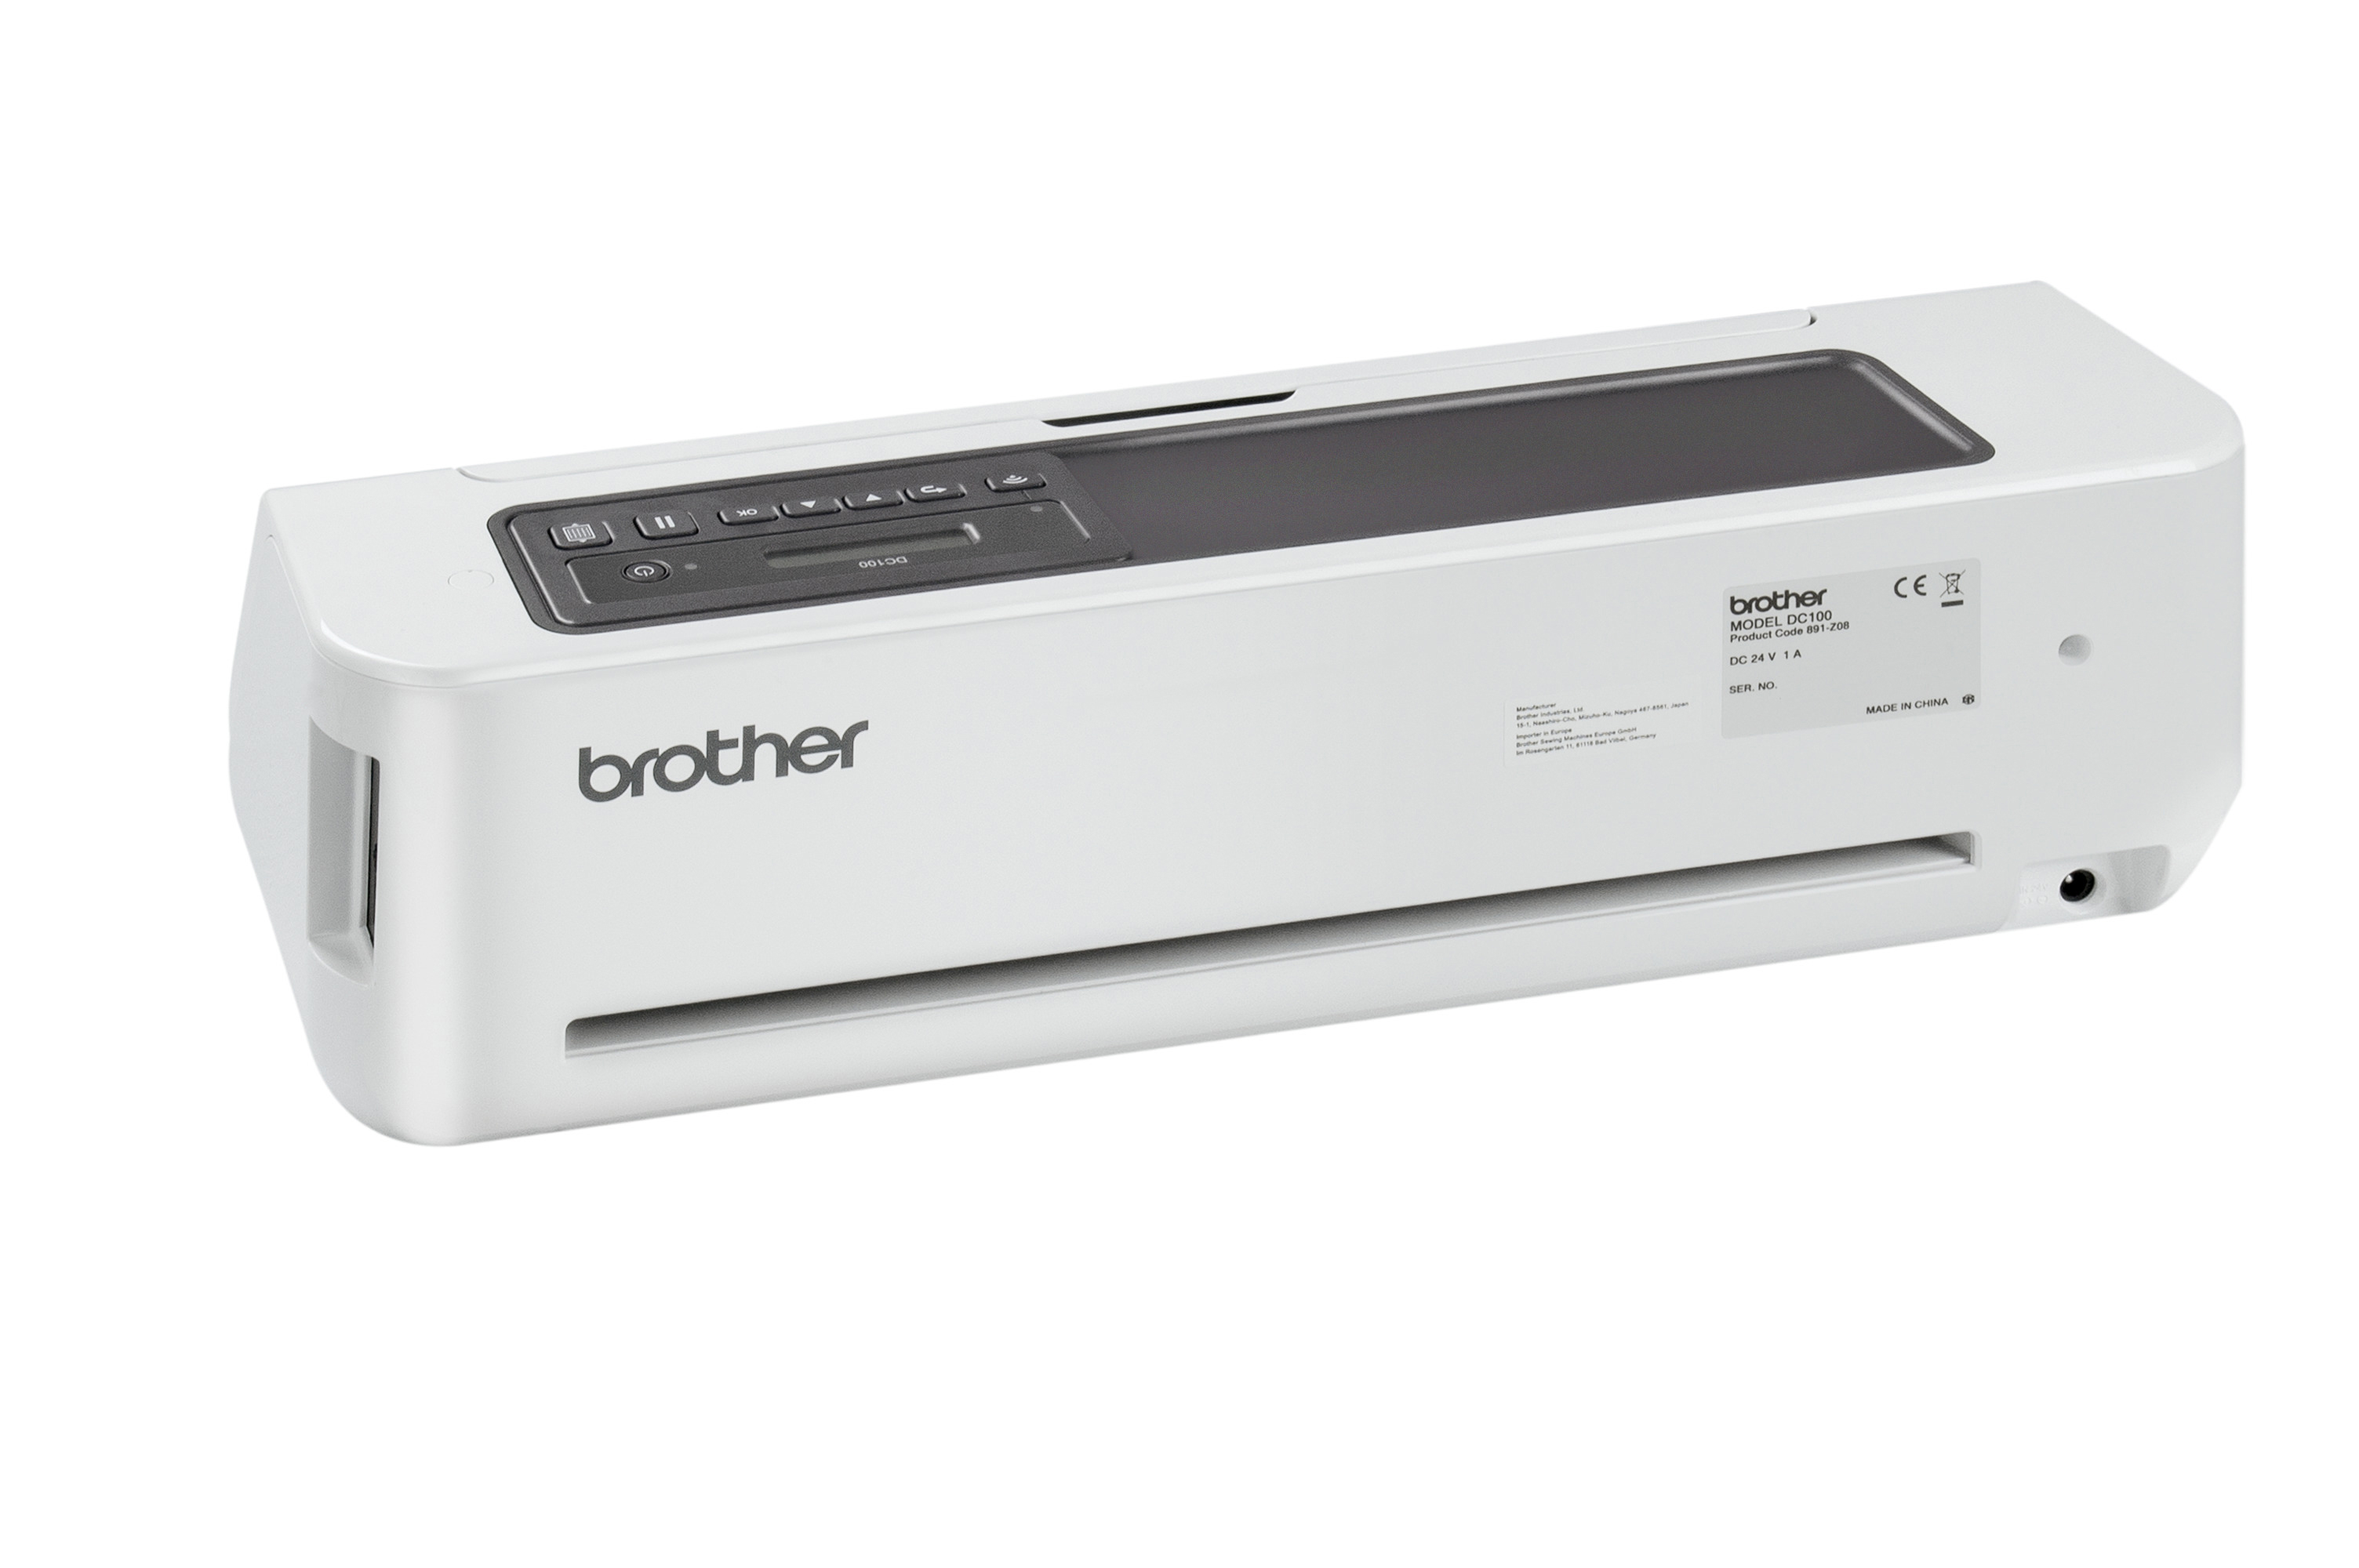 BROTHER DesignNCut DC100 Plotter